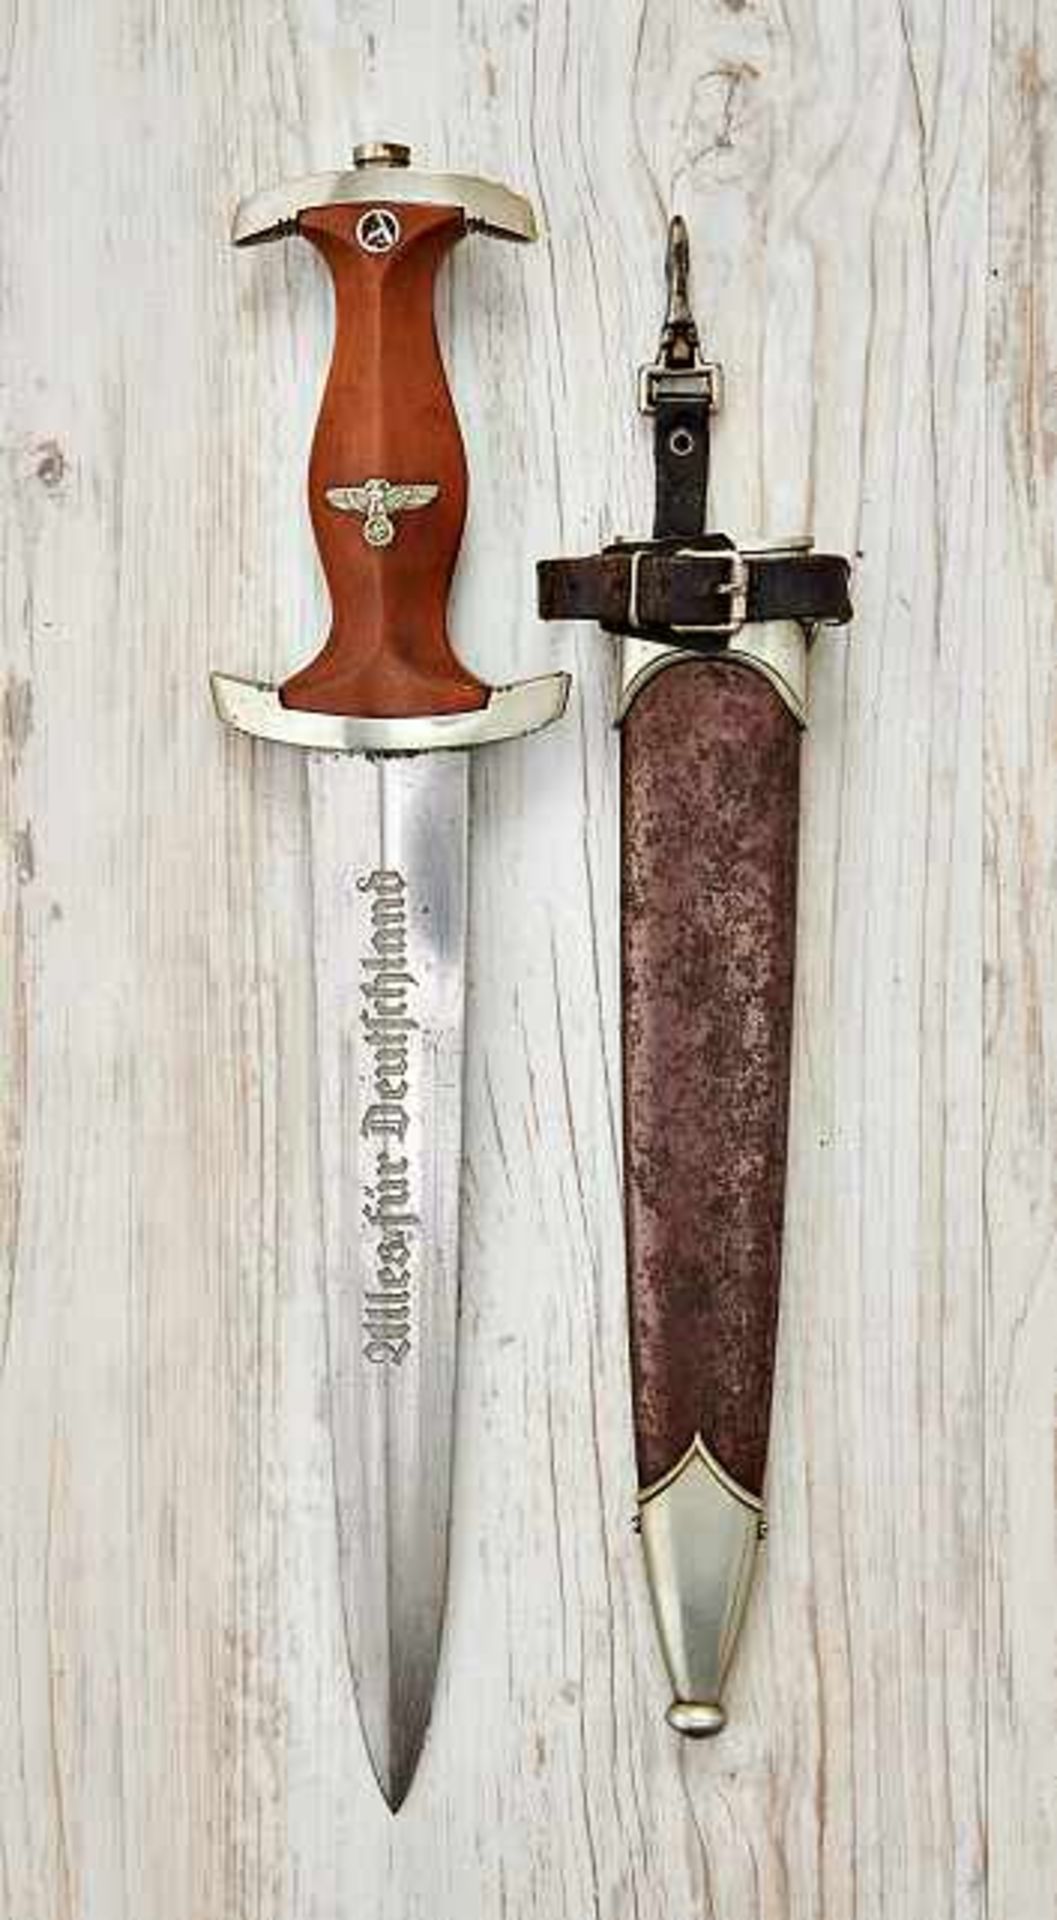 Deutsches Reich 1933 - 1945 - Sturmabteilung-SA : Early SA Dagger.Maker marked on ricasso to